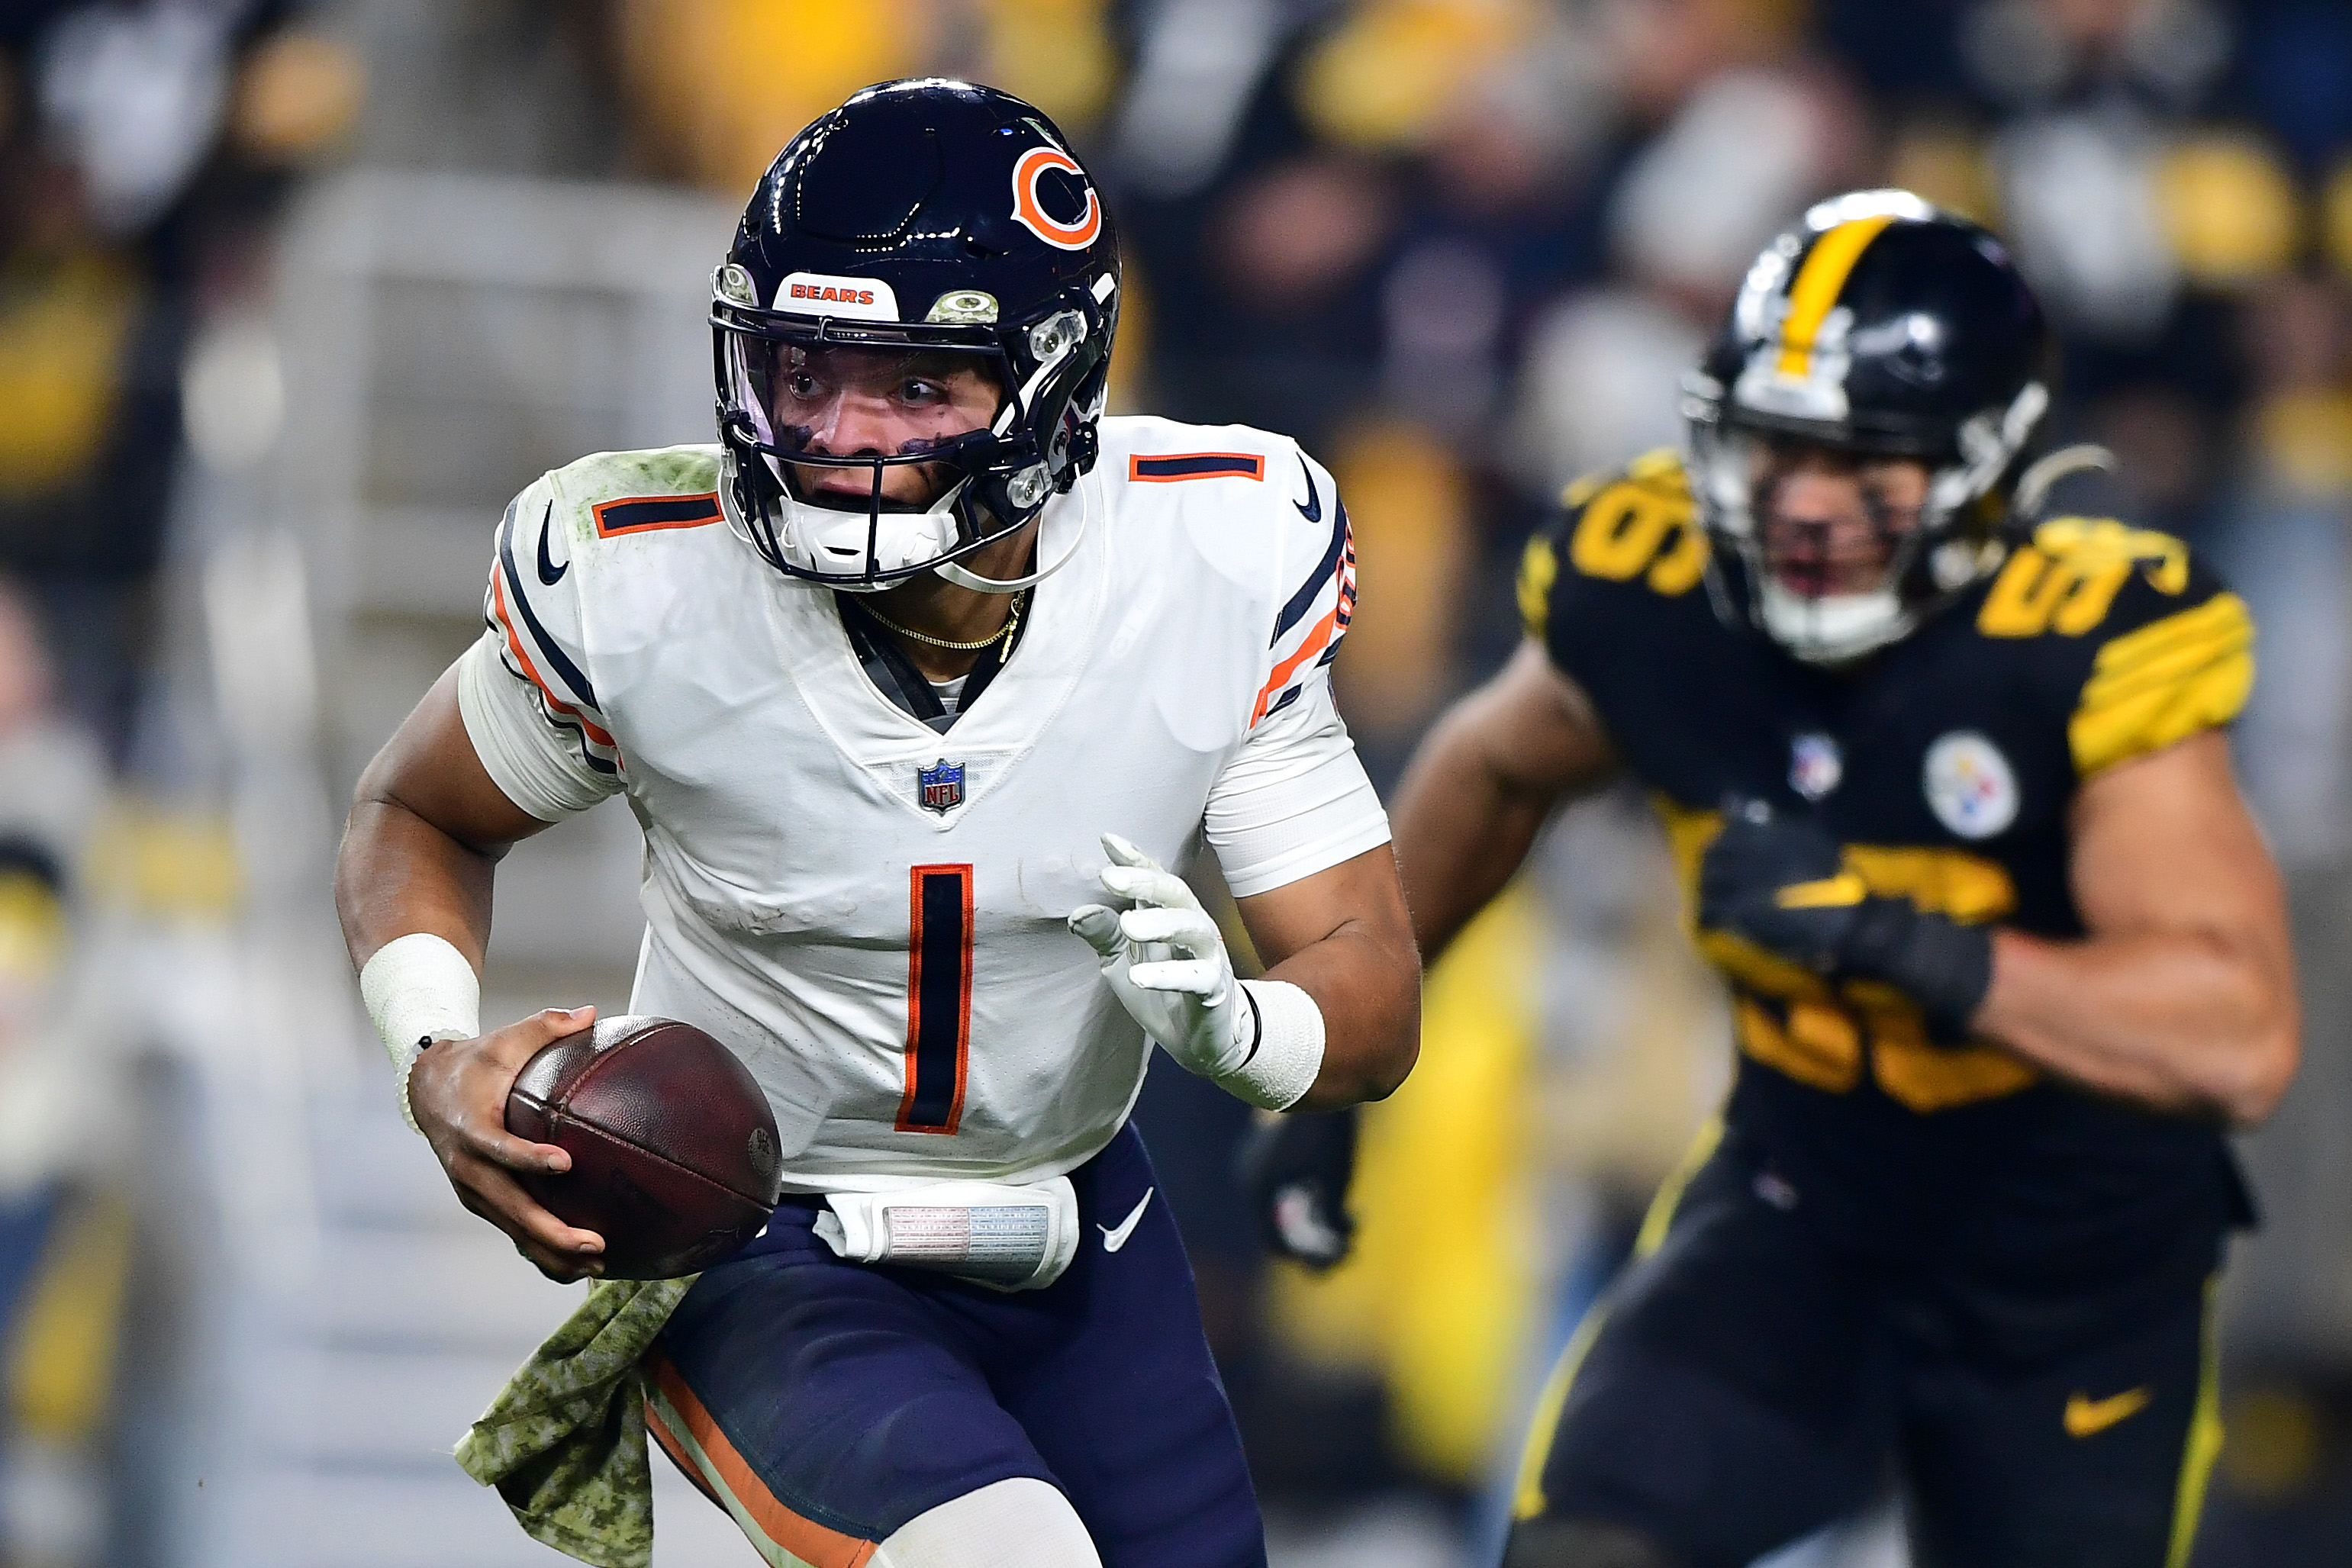 Quarterback Justin Fields #1 of the Chicago Bears throws the ball down the field against the Pittsburgh Steelers during the third quarter at Heinz Field on November 8, 2021 in Pittsburgh, Pennsylvania.